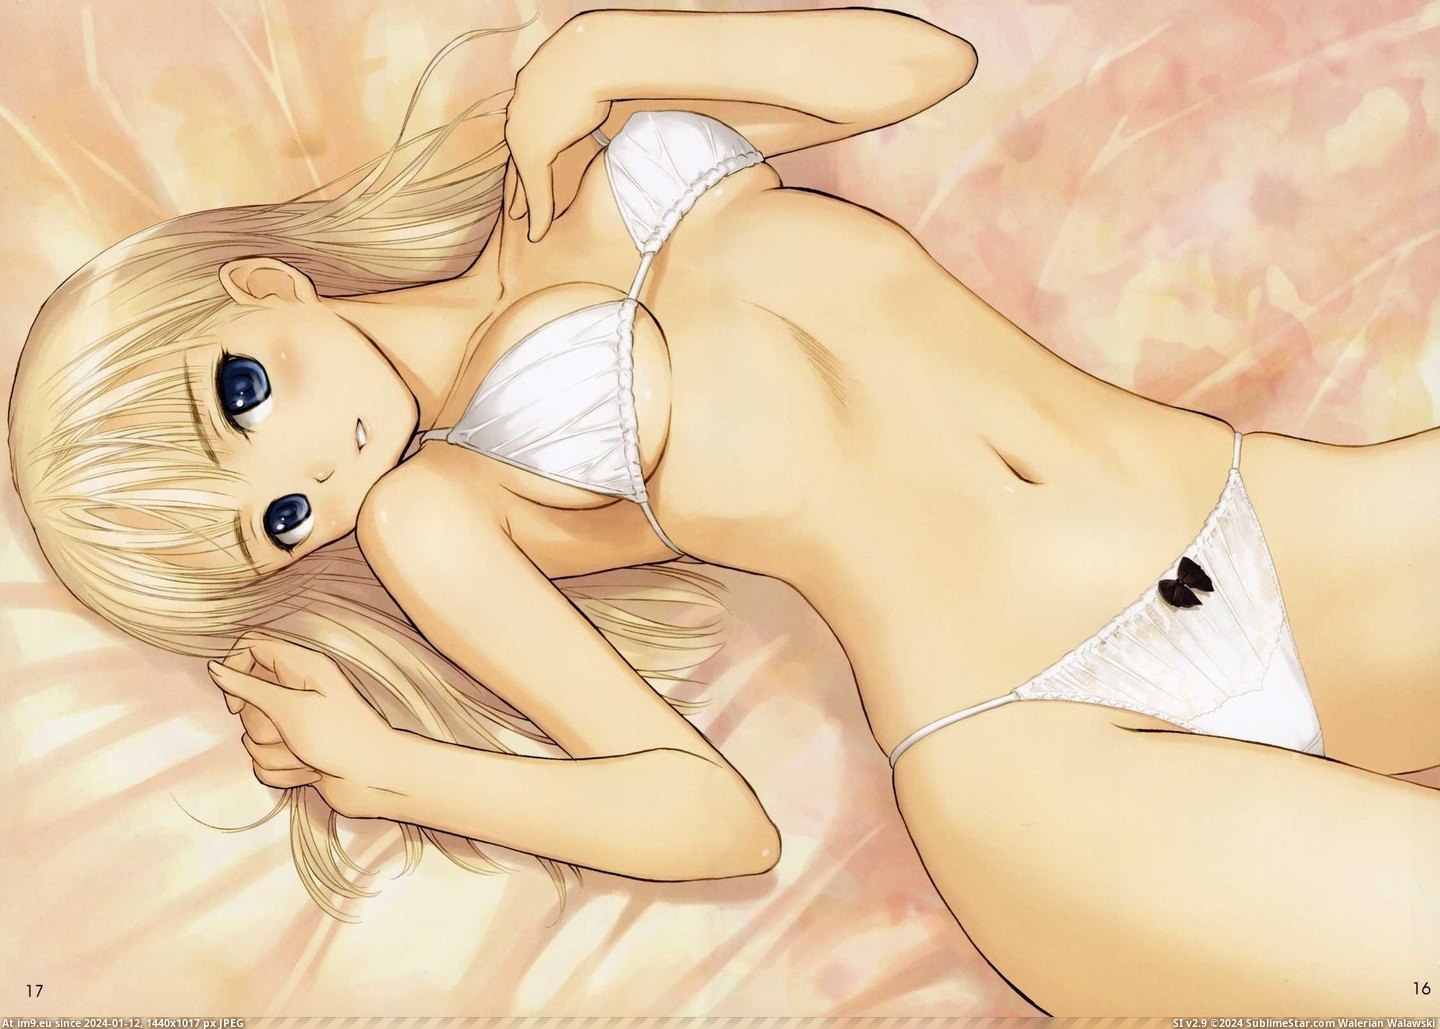 #Sexy #Anime #Wallpapers #Girls 15 Best Sexy Anime Girls Hd Wallpapers 2560 X 1600 (anime image) Pic. (Image of album Anime wallpapers and pics))